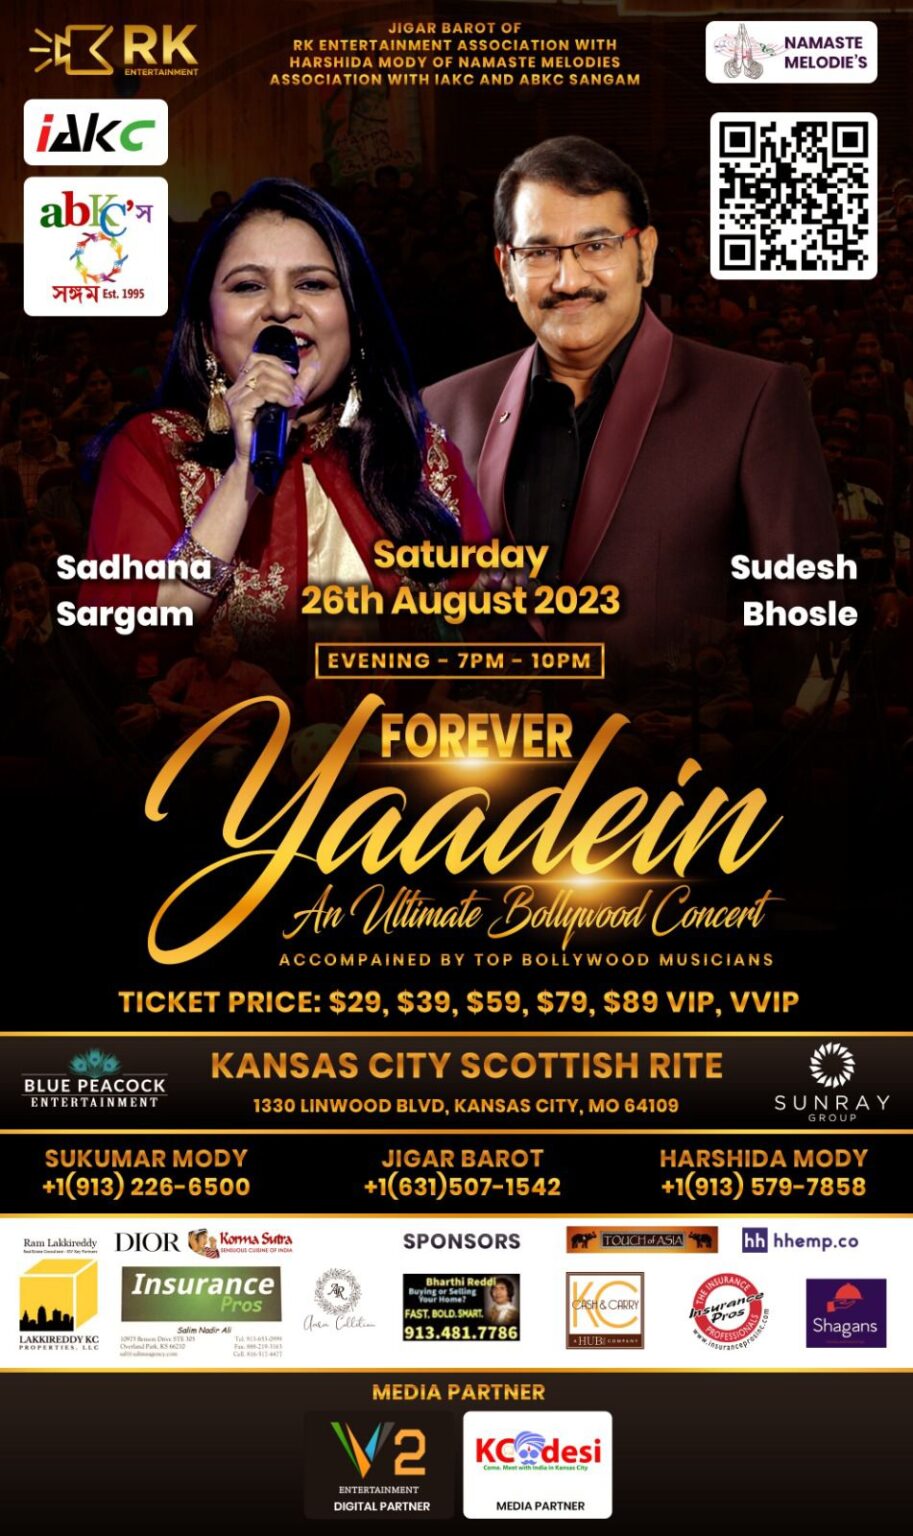 FOREVER YAADIEN Duo Bollywood Musical Concert IAKC